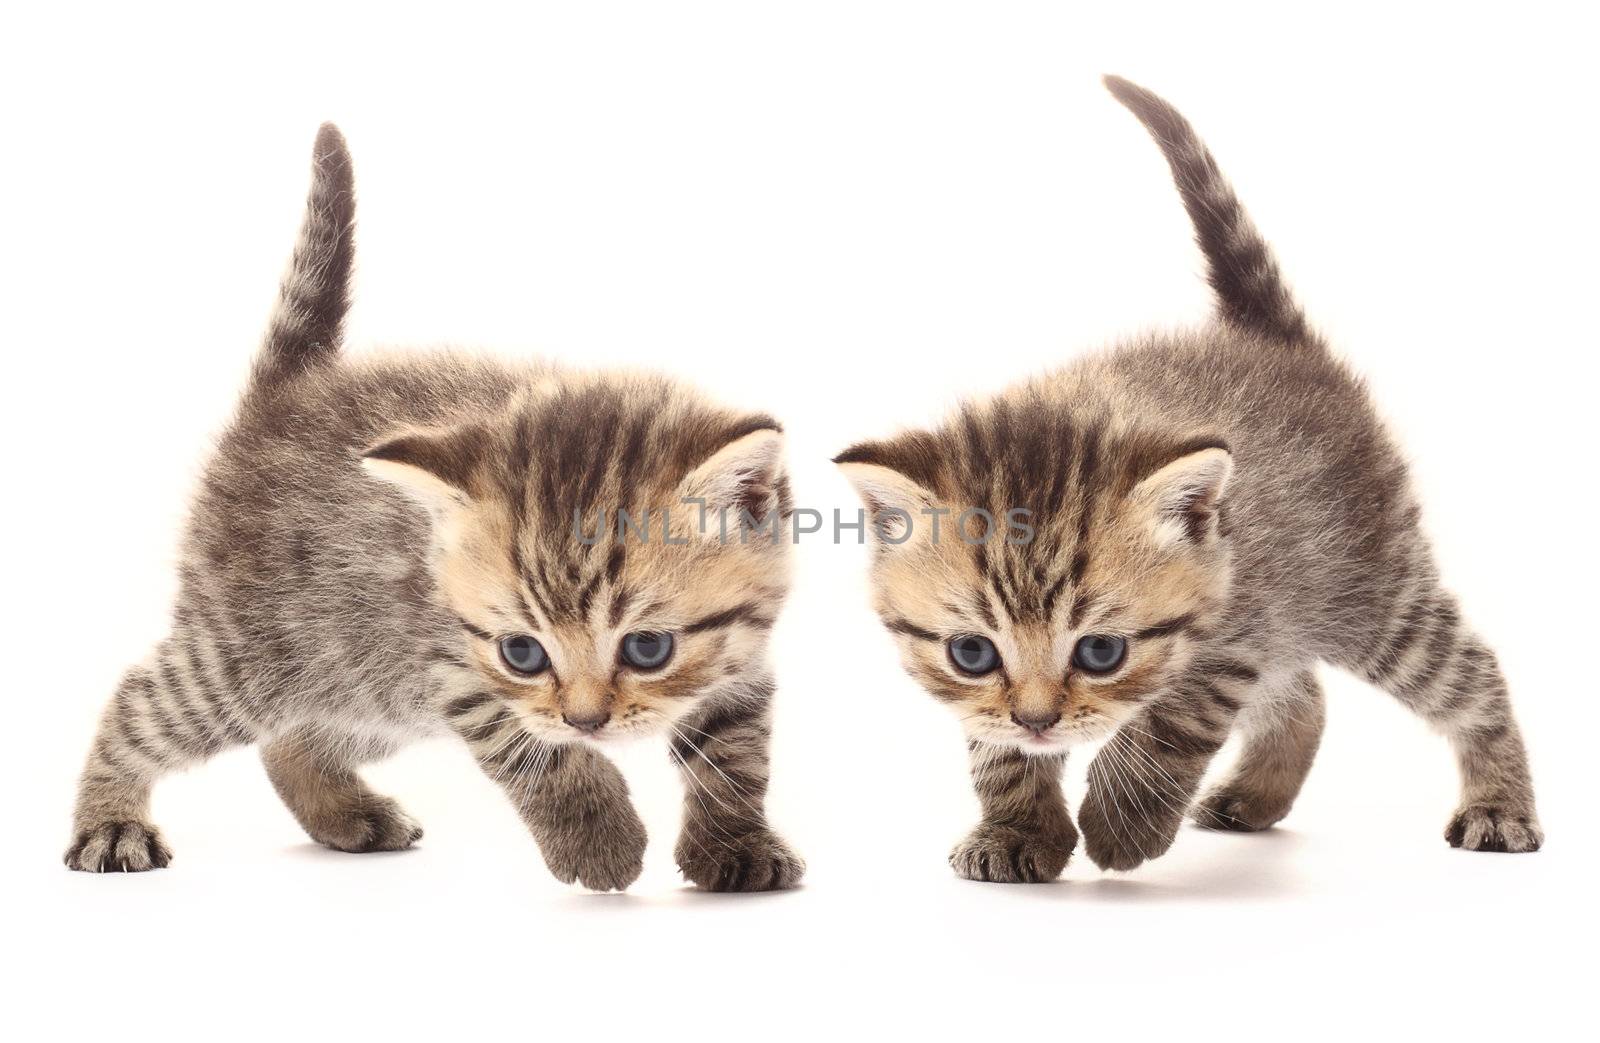 Two small scottish kittens on white background